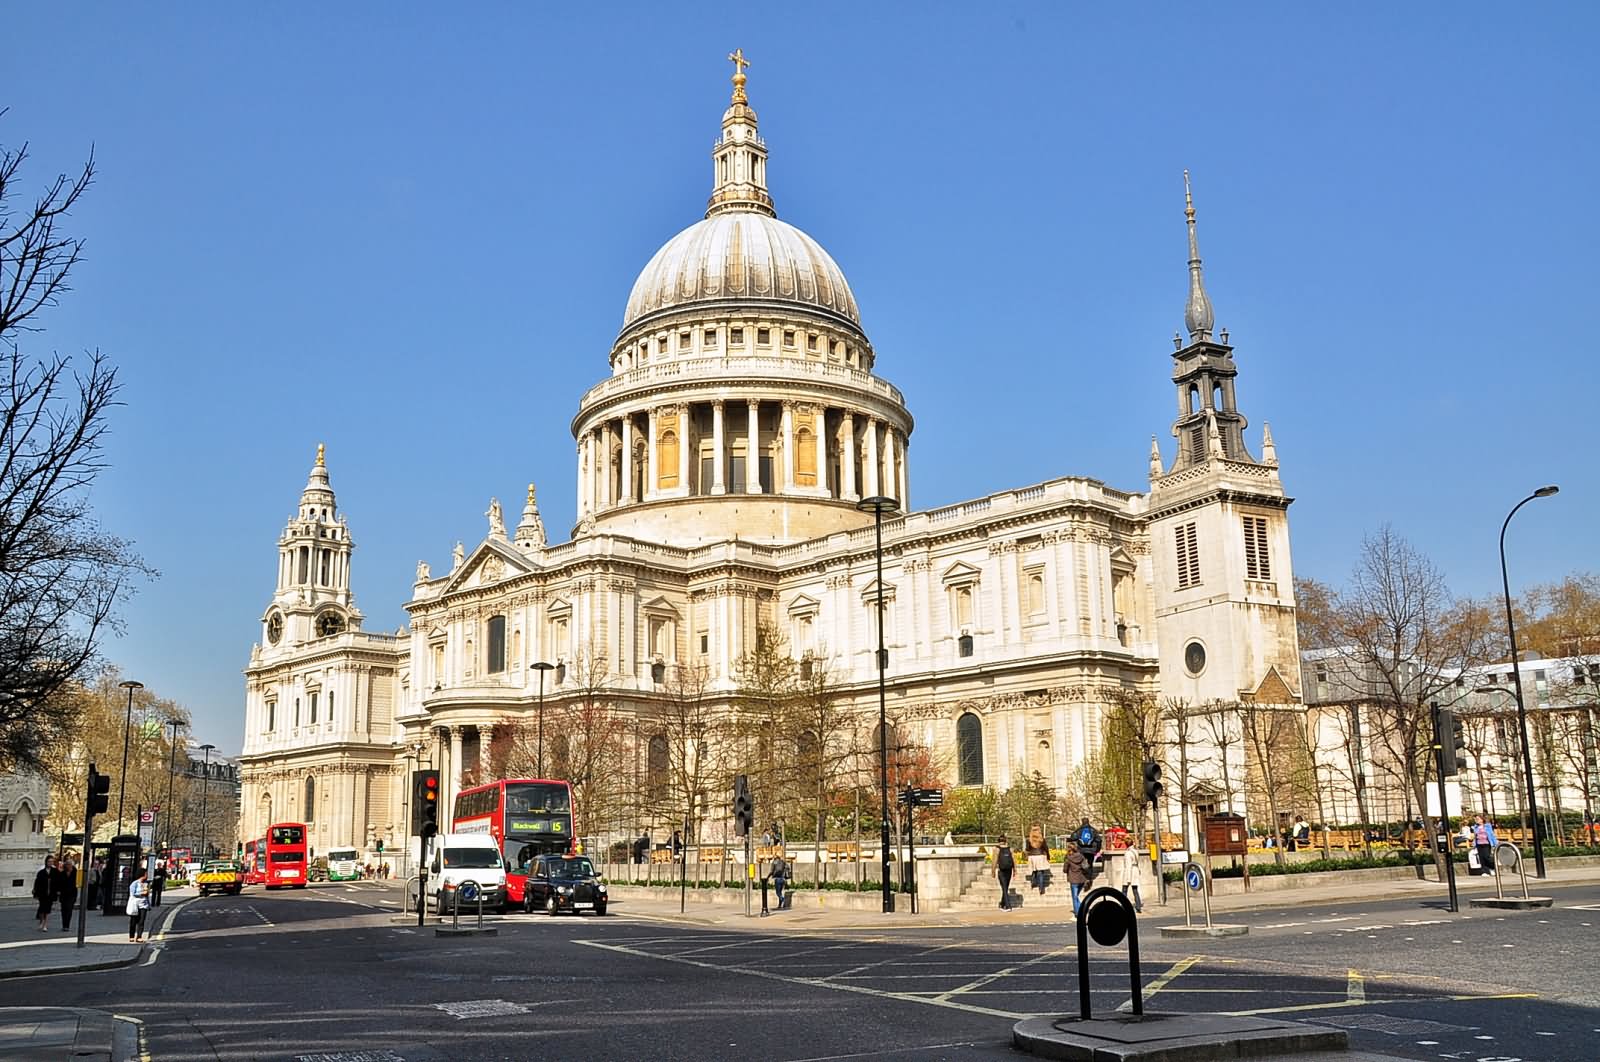 Beautiful Picture Of The St Paul's Cathedral, London